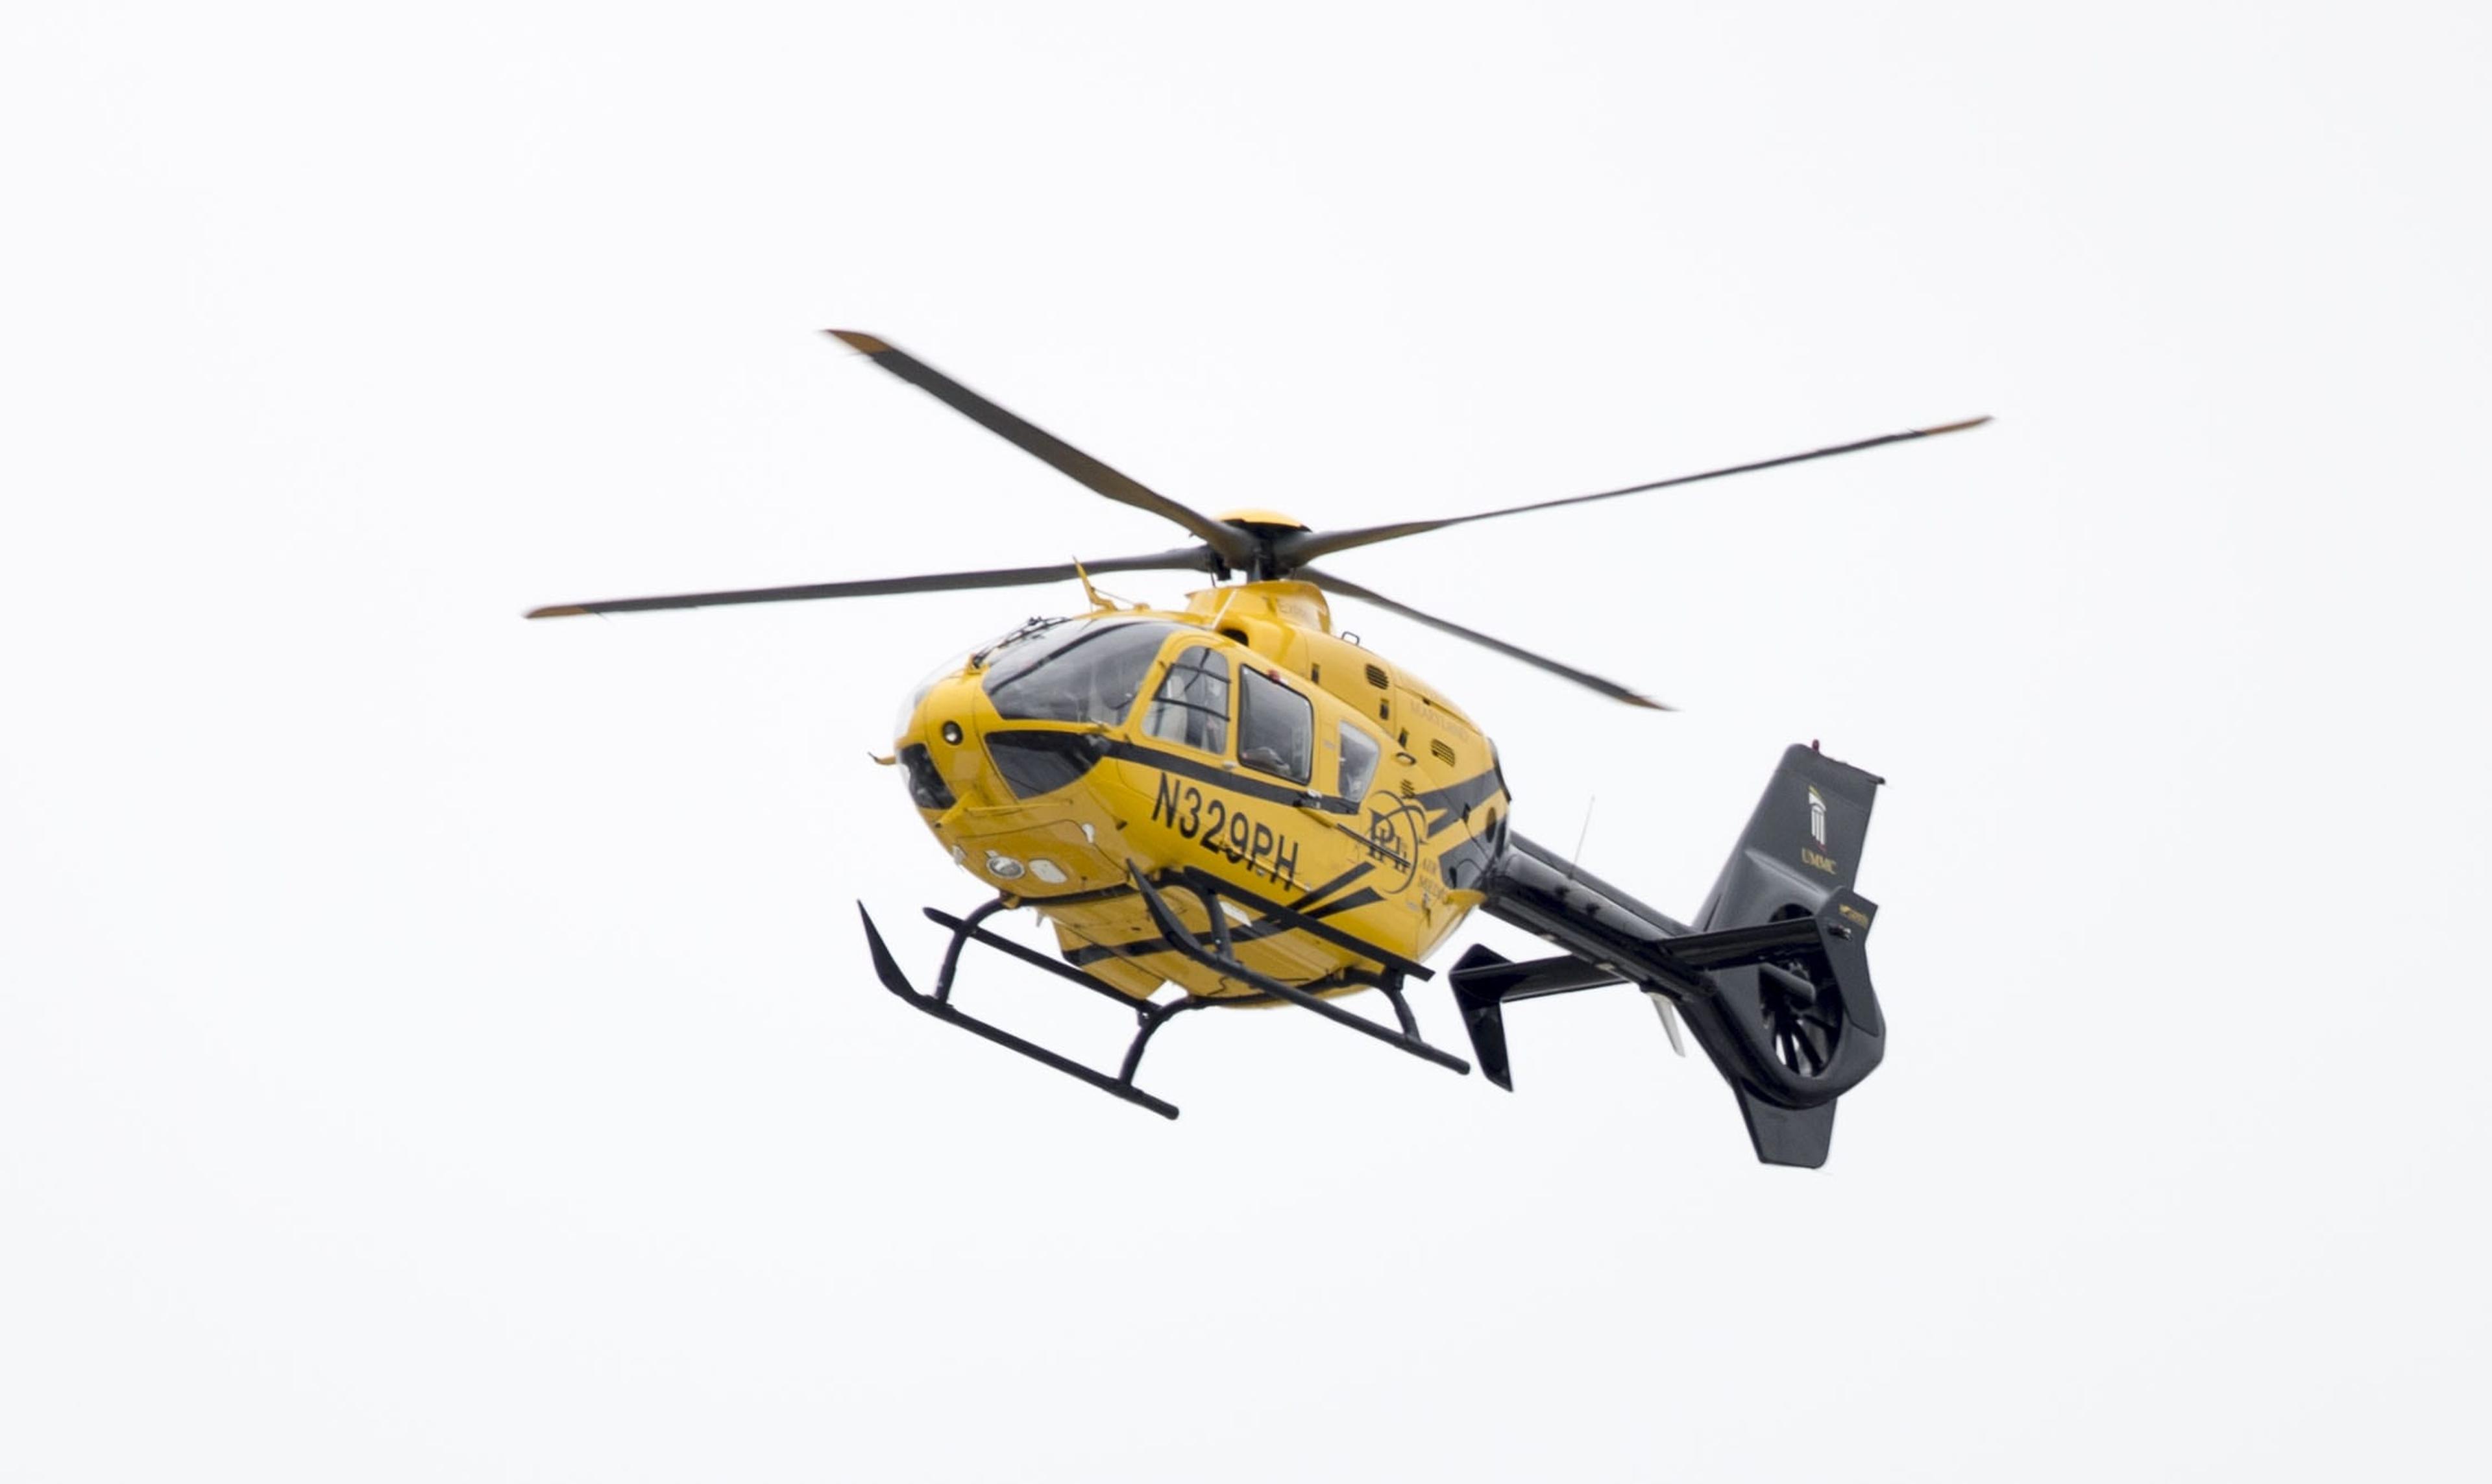 A yellow medical center helicopter in the air